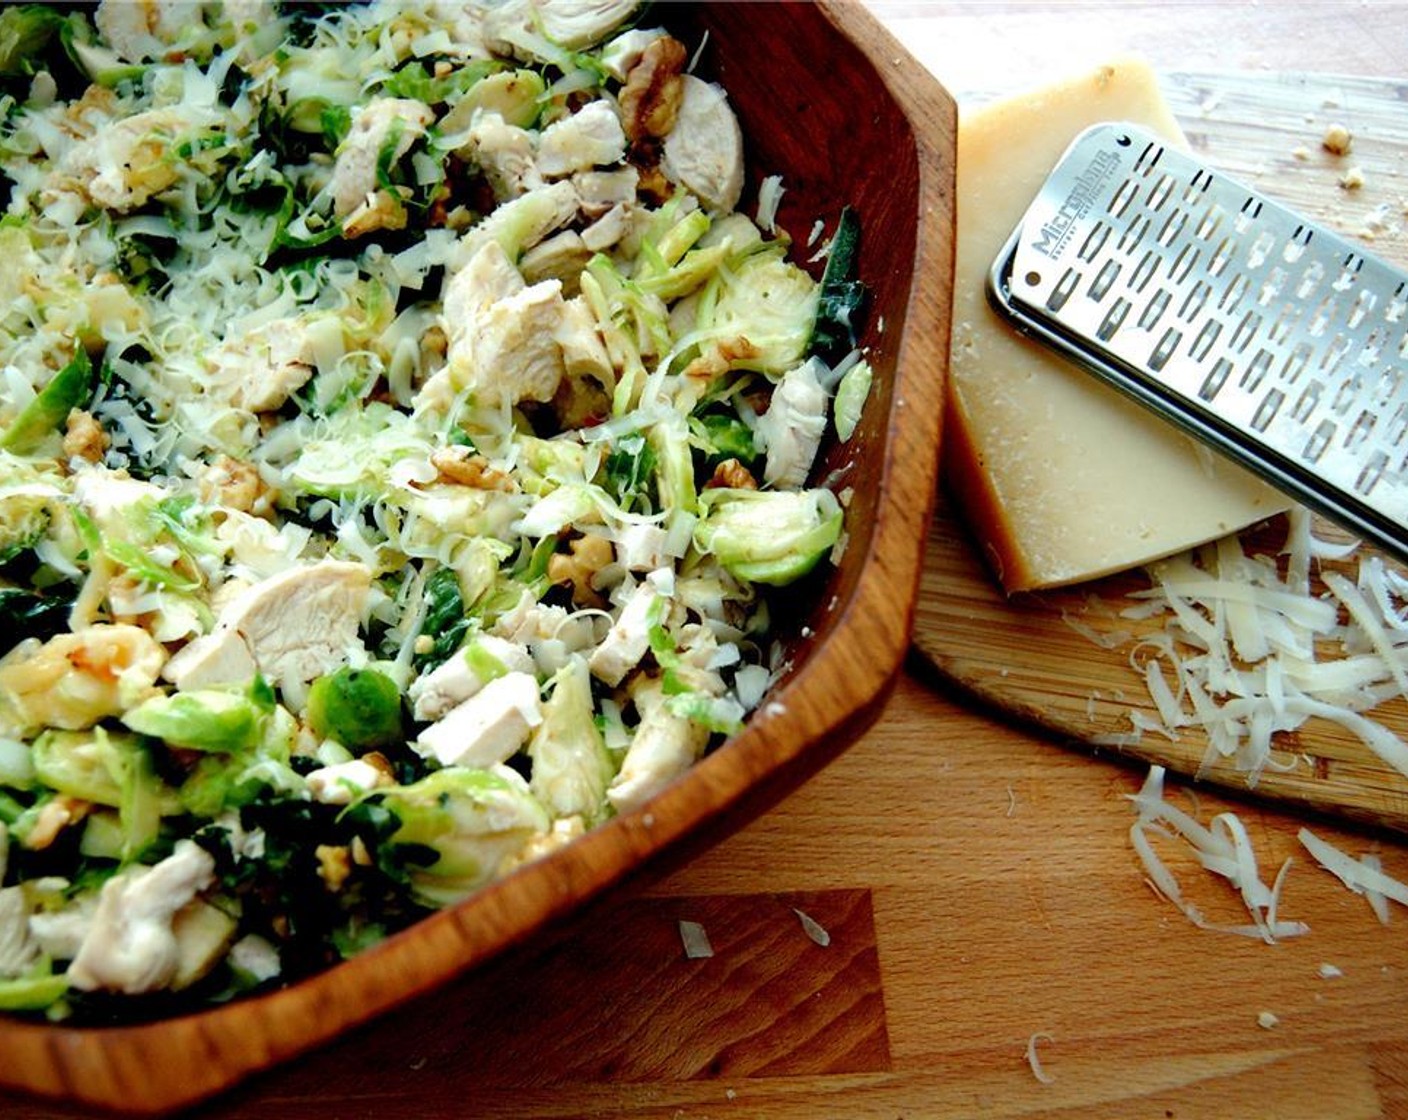 step 6 Toss together the vegetables, Parmesan Cheese (1/4 cup), Shredded Chicken (1 cup), walnuts and dressing. Serve warm or cold.